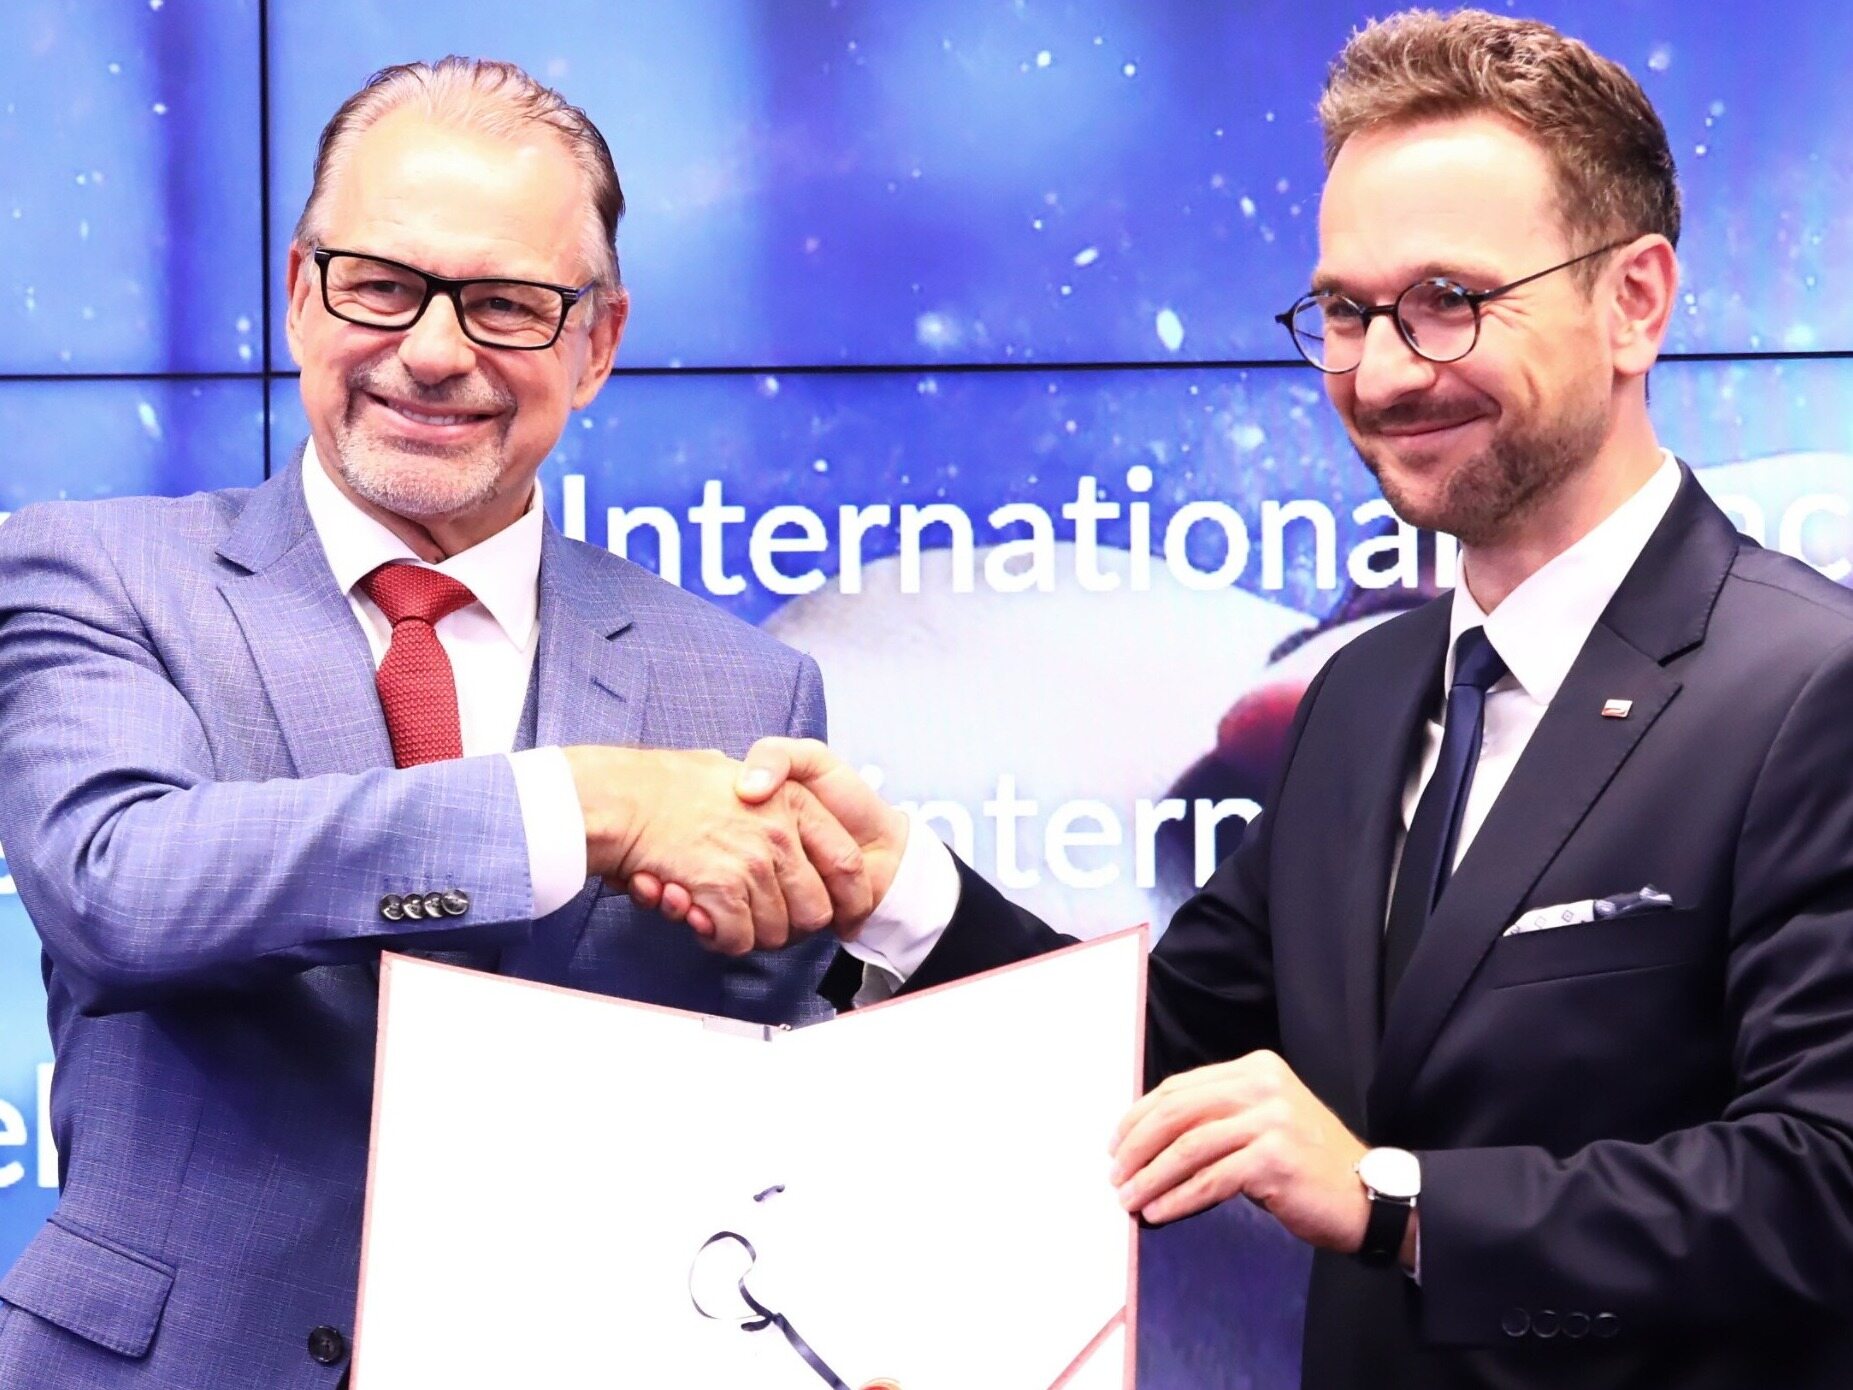 Poland in space.  There is an agreement between the government and the European Space Agency